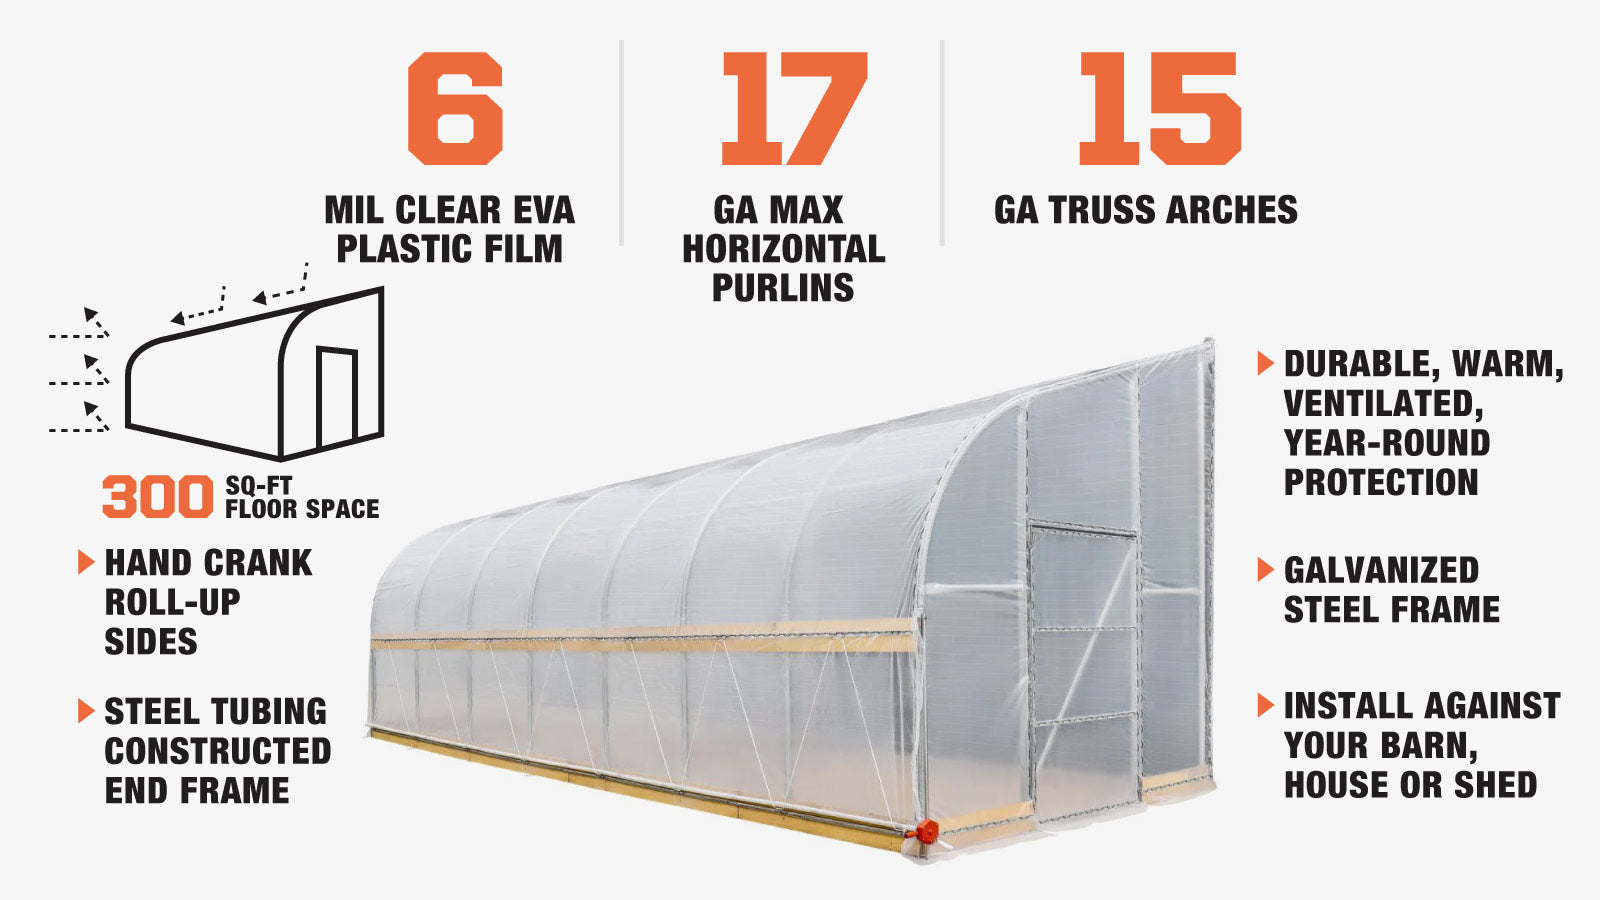 TMG Industrial 10’ x 30’ Lean-To Greenhouse Grow Tent w/6 Mil Clear EVA Plastic Film, Cold Frame, Hand Crank Roll-Up Side, 6-½’ Sidewall, TMG-GHL1030-description-image